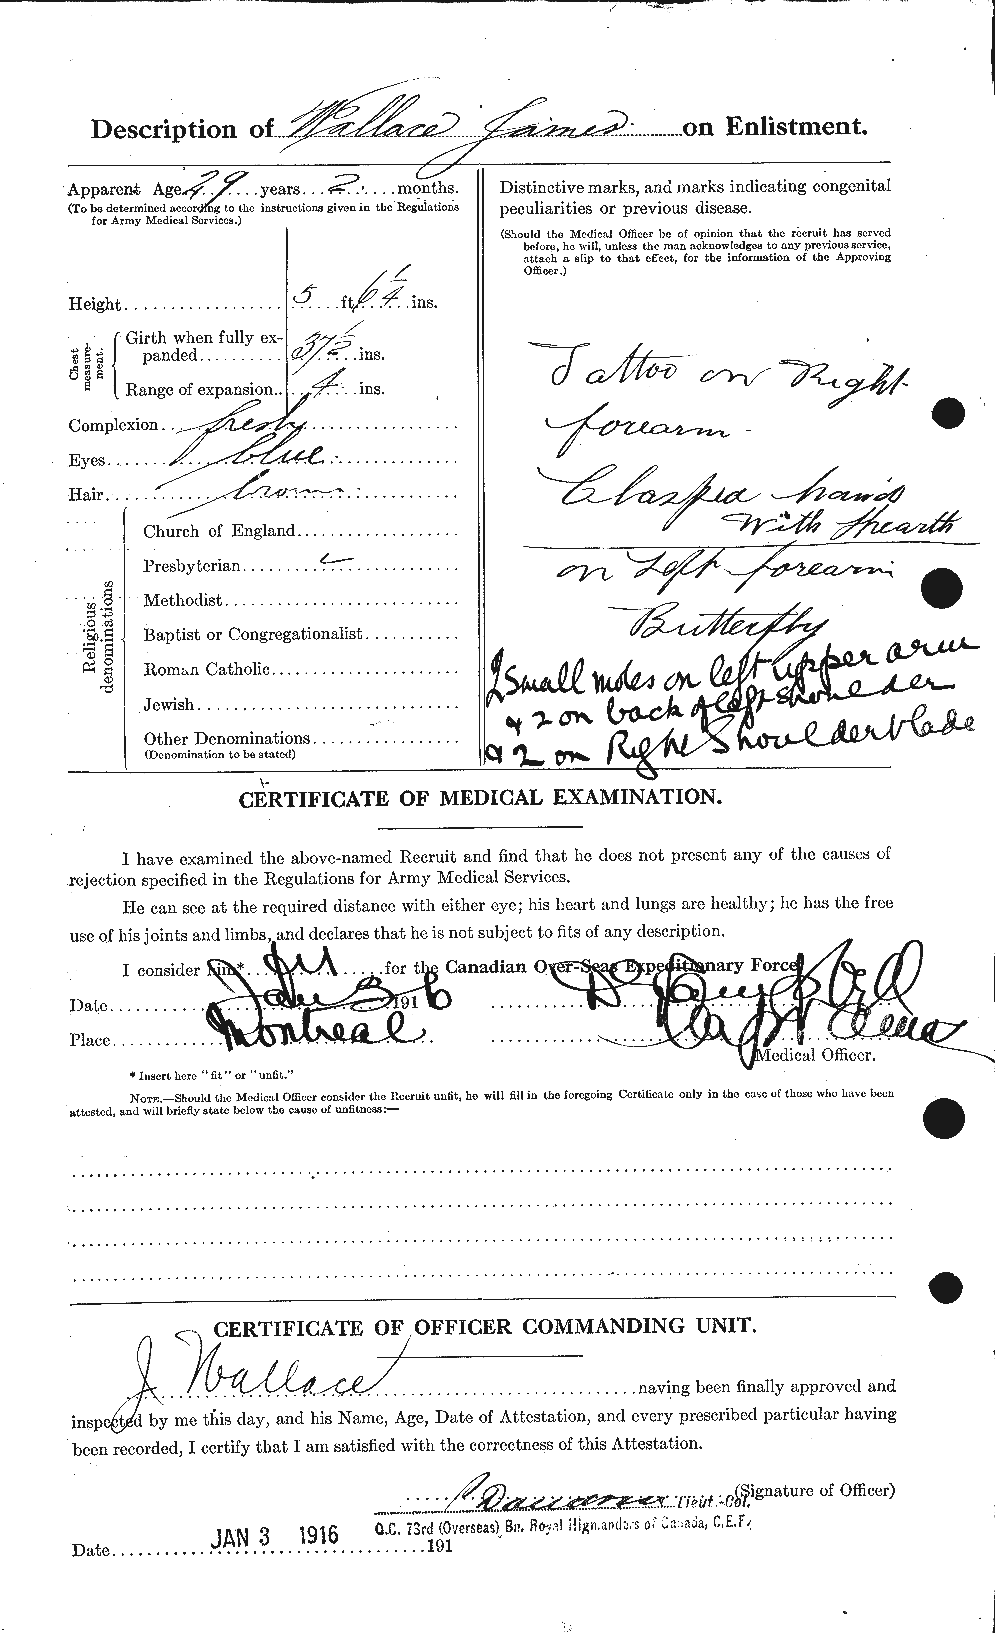 Personnel Records of the First World War - CEF 654543b